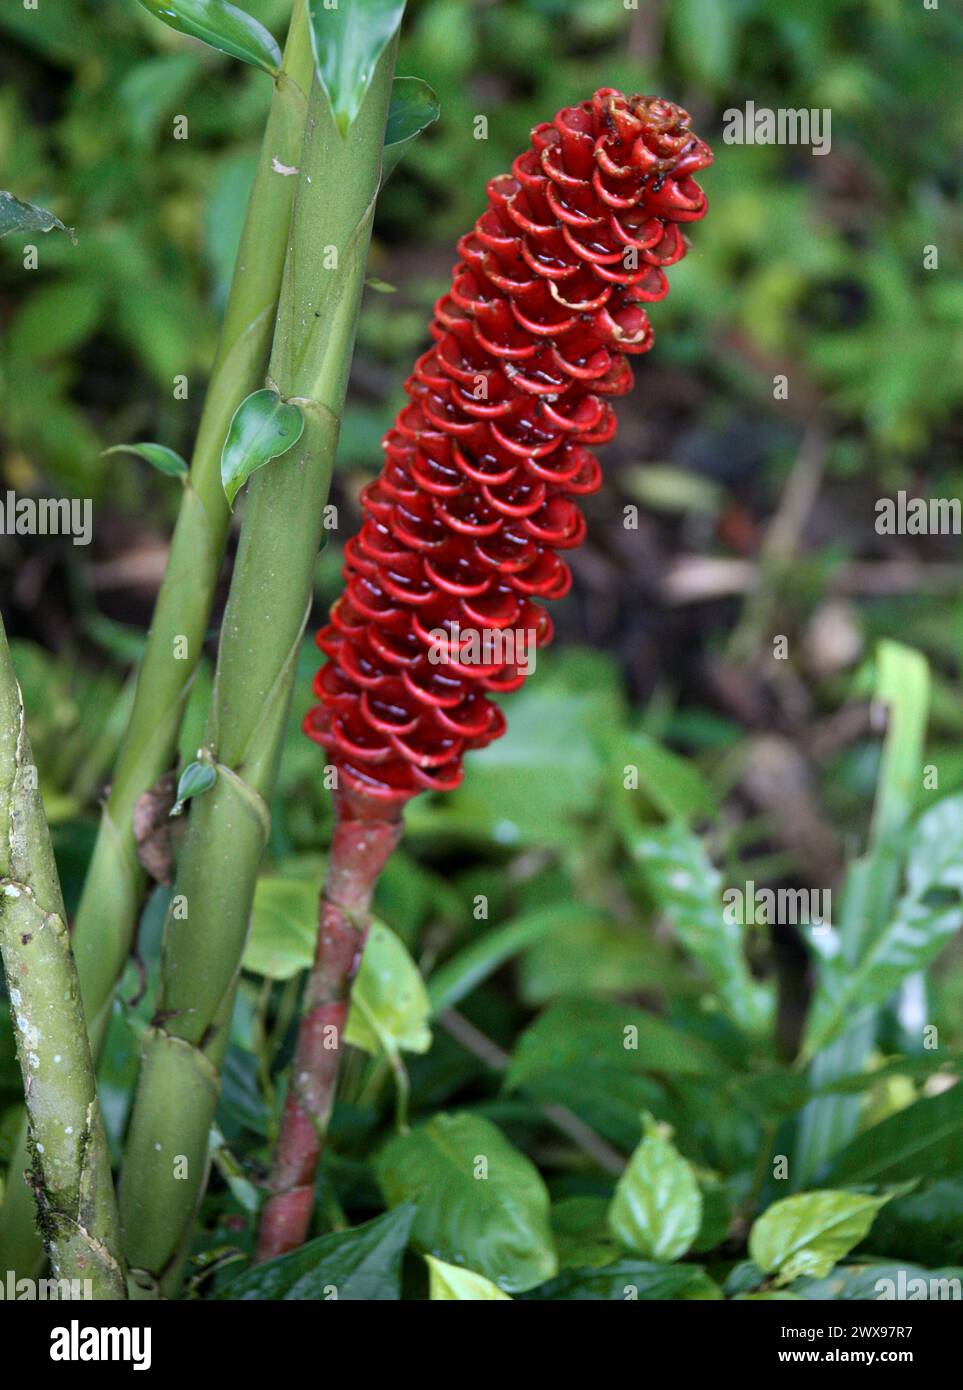 Ginger Plant, Zingiber spectabile, Zingiberaceae. Costa Rica.  A family of tropical and subtropical perennial herbs. Stock Photo